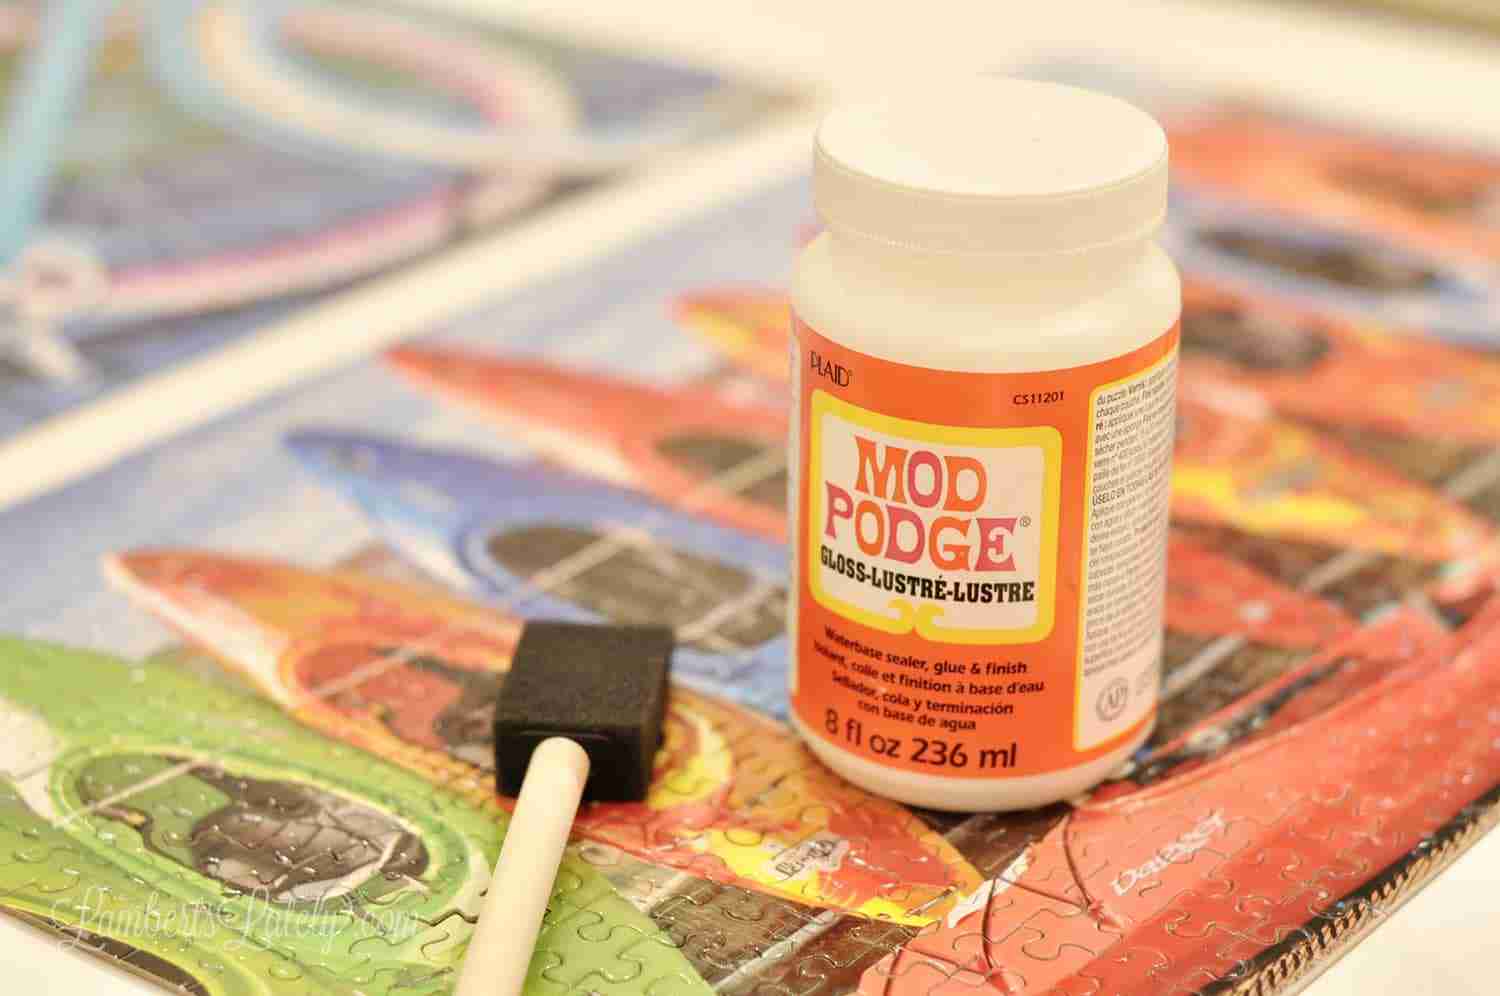 bottle of mod podge and a sponge brush on a puzzle